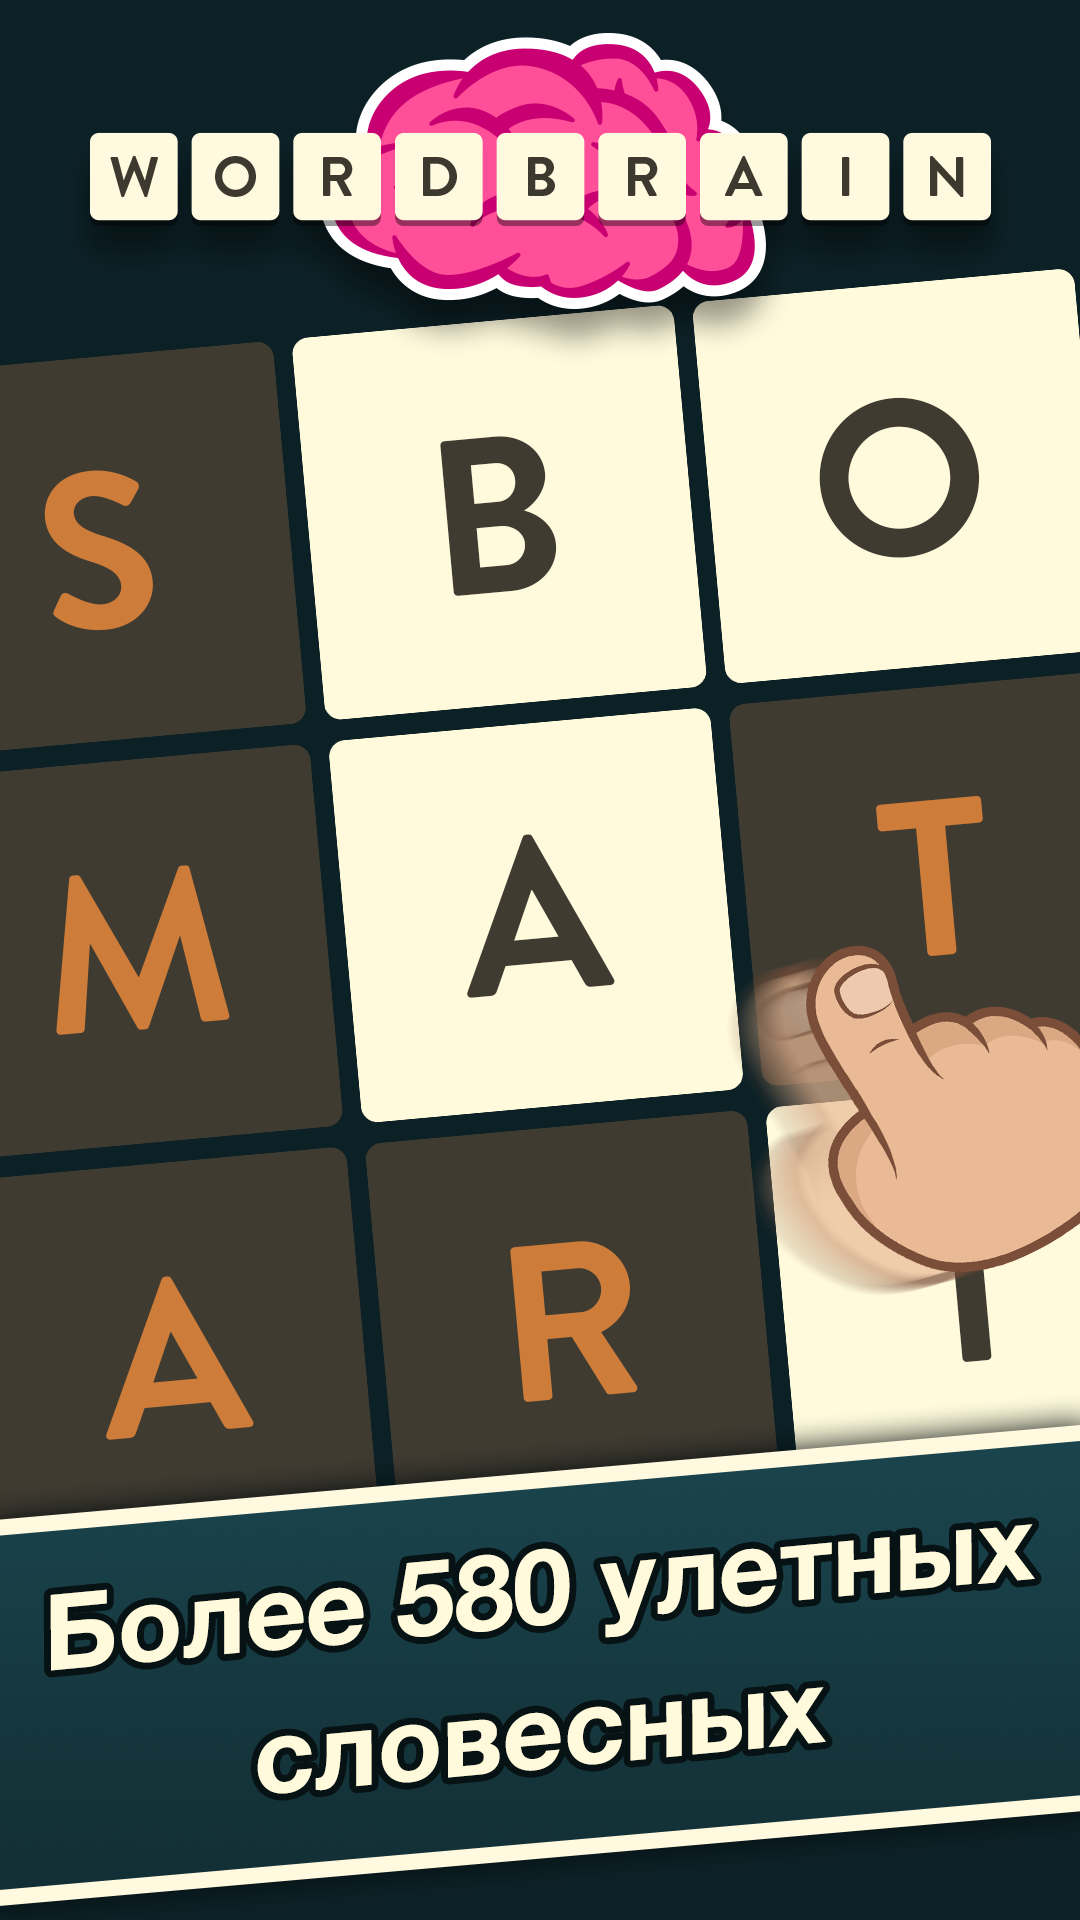 Android application WordBrain - Word puzzle game screenshort